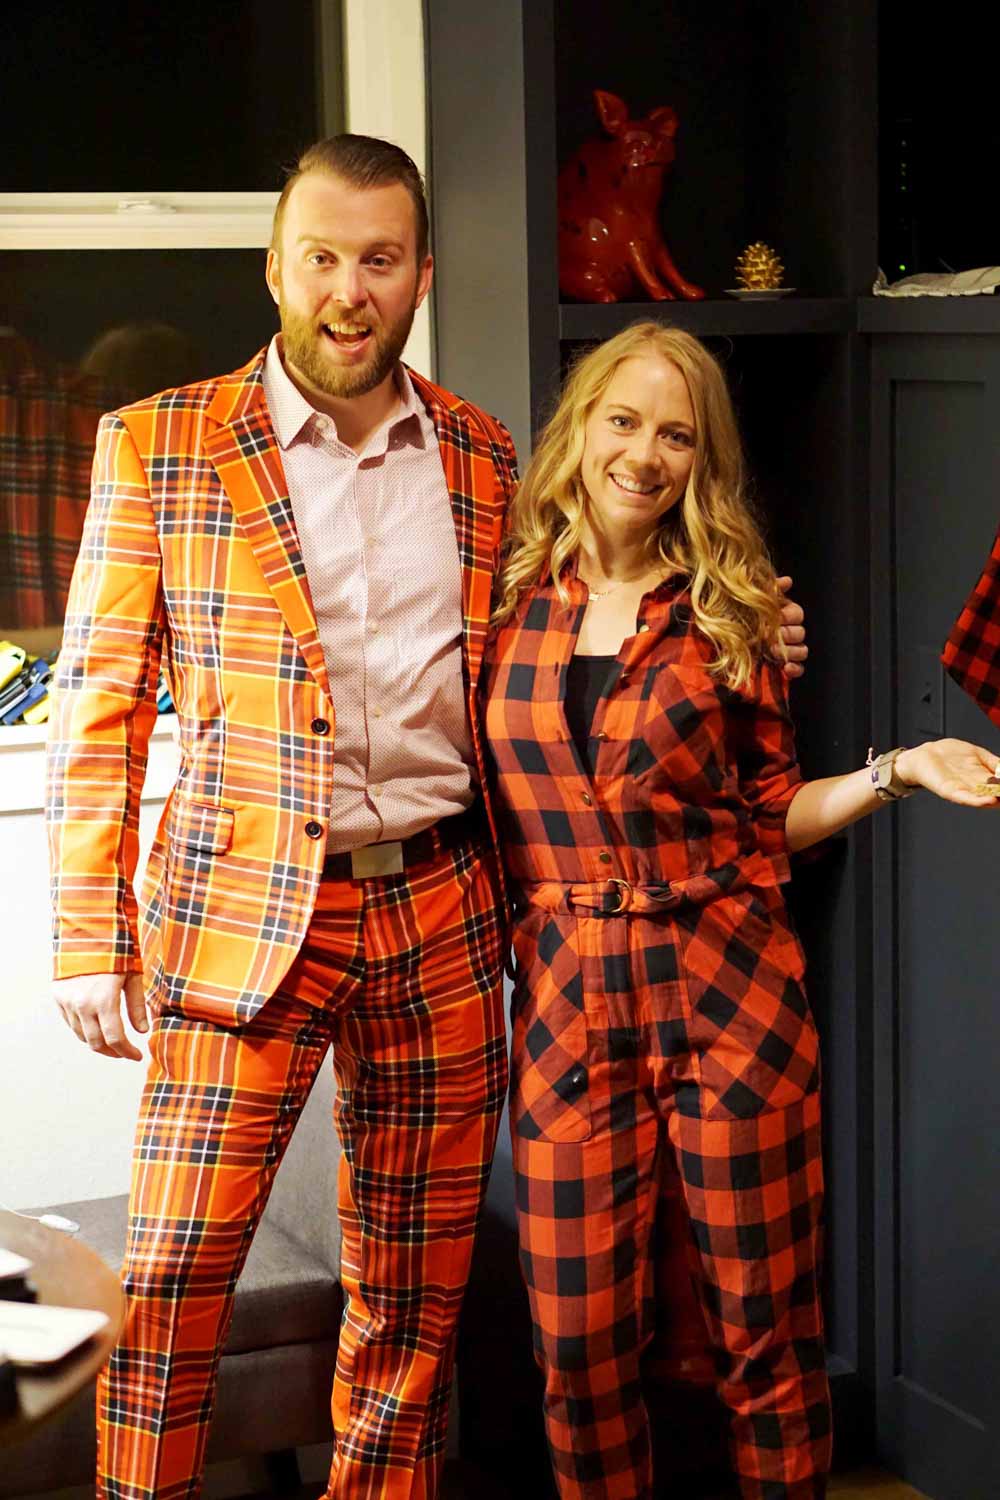 WHy brave the cold in skimpy cocktail gear when you can wear plaid inside. Indoor S'Mores, Chili Bar, Meatballs, Hummus Cukes, Champagne punch and more! Find a healthy and comforting menu for your lumberjack New Years Eve Party